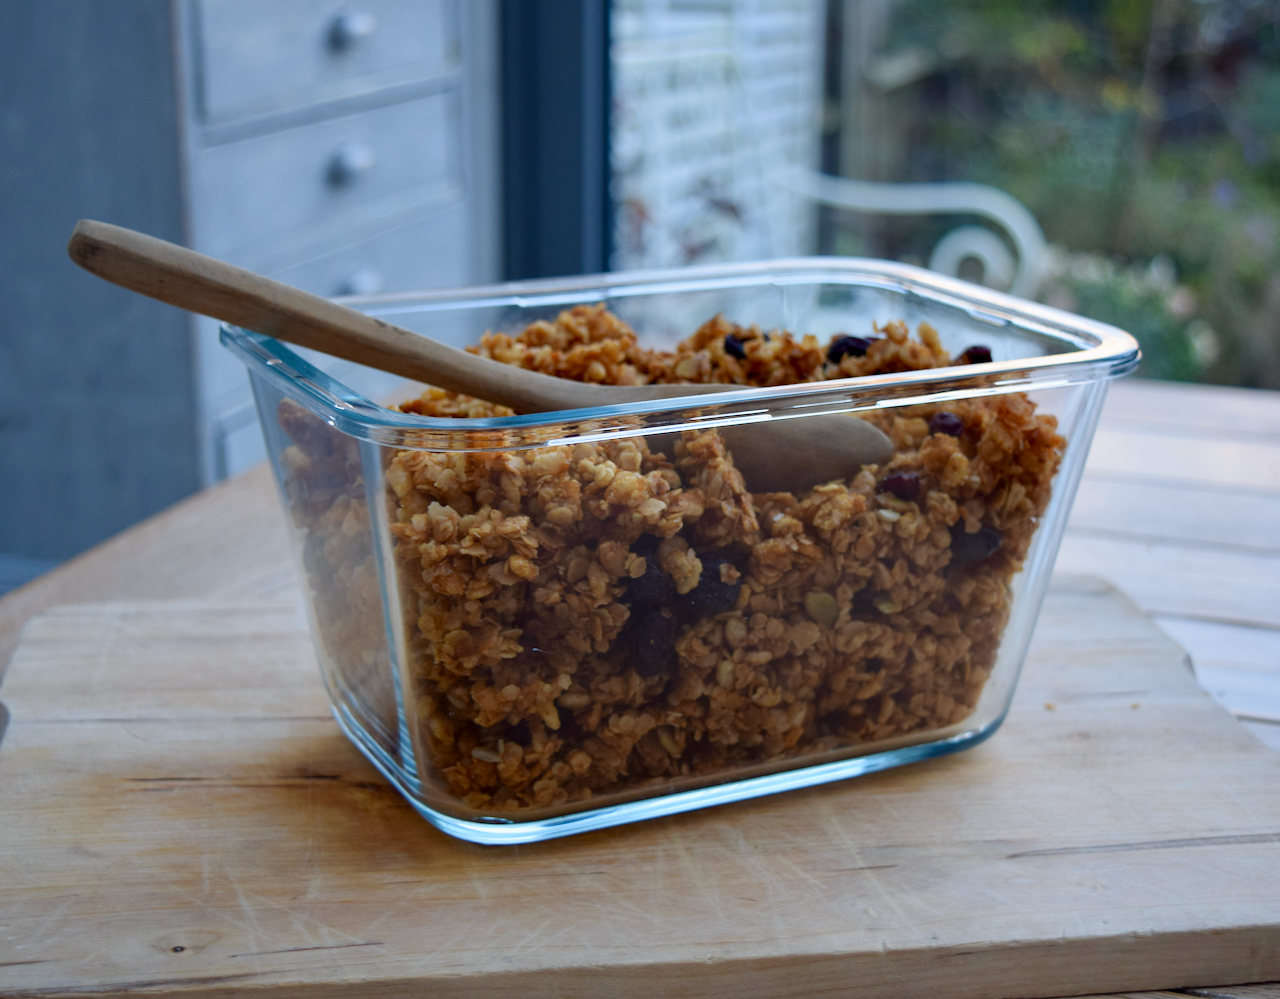 Golden Syrup Granola recipe from Lucy Loves Food Blog